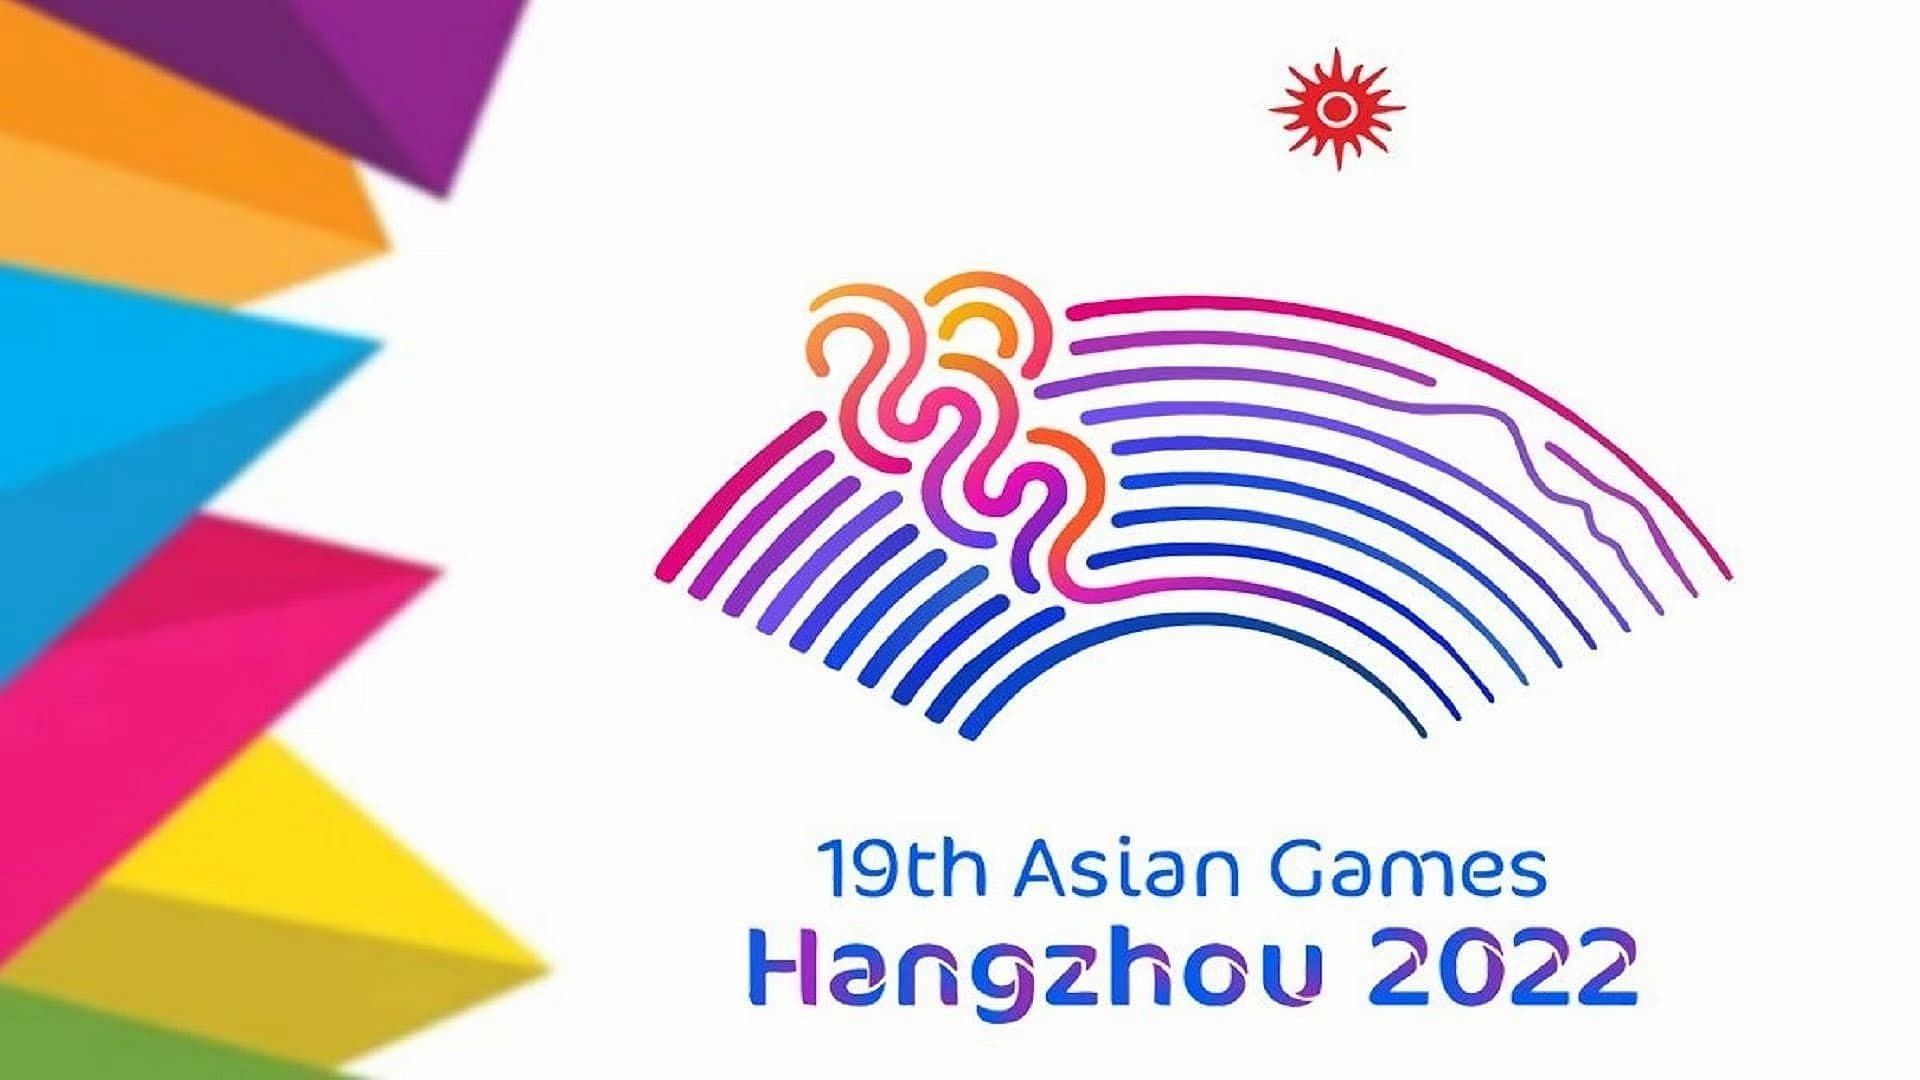 The official logo for the 2022 Asian Games. 